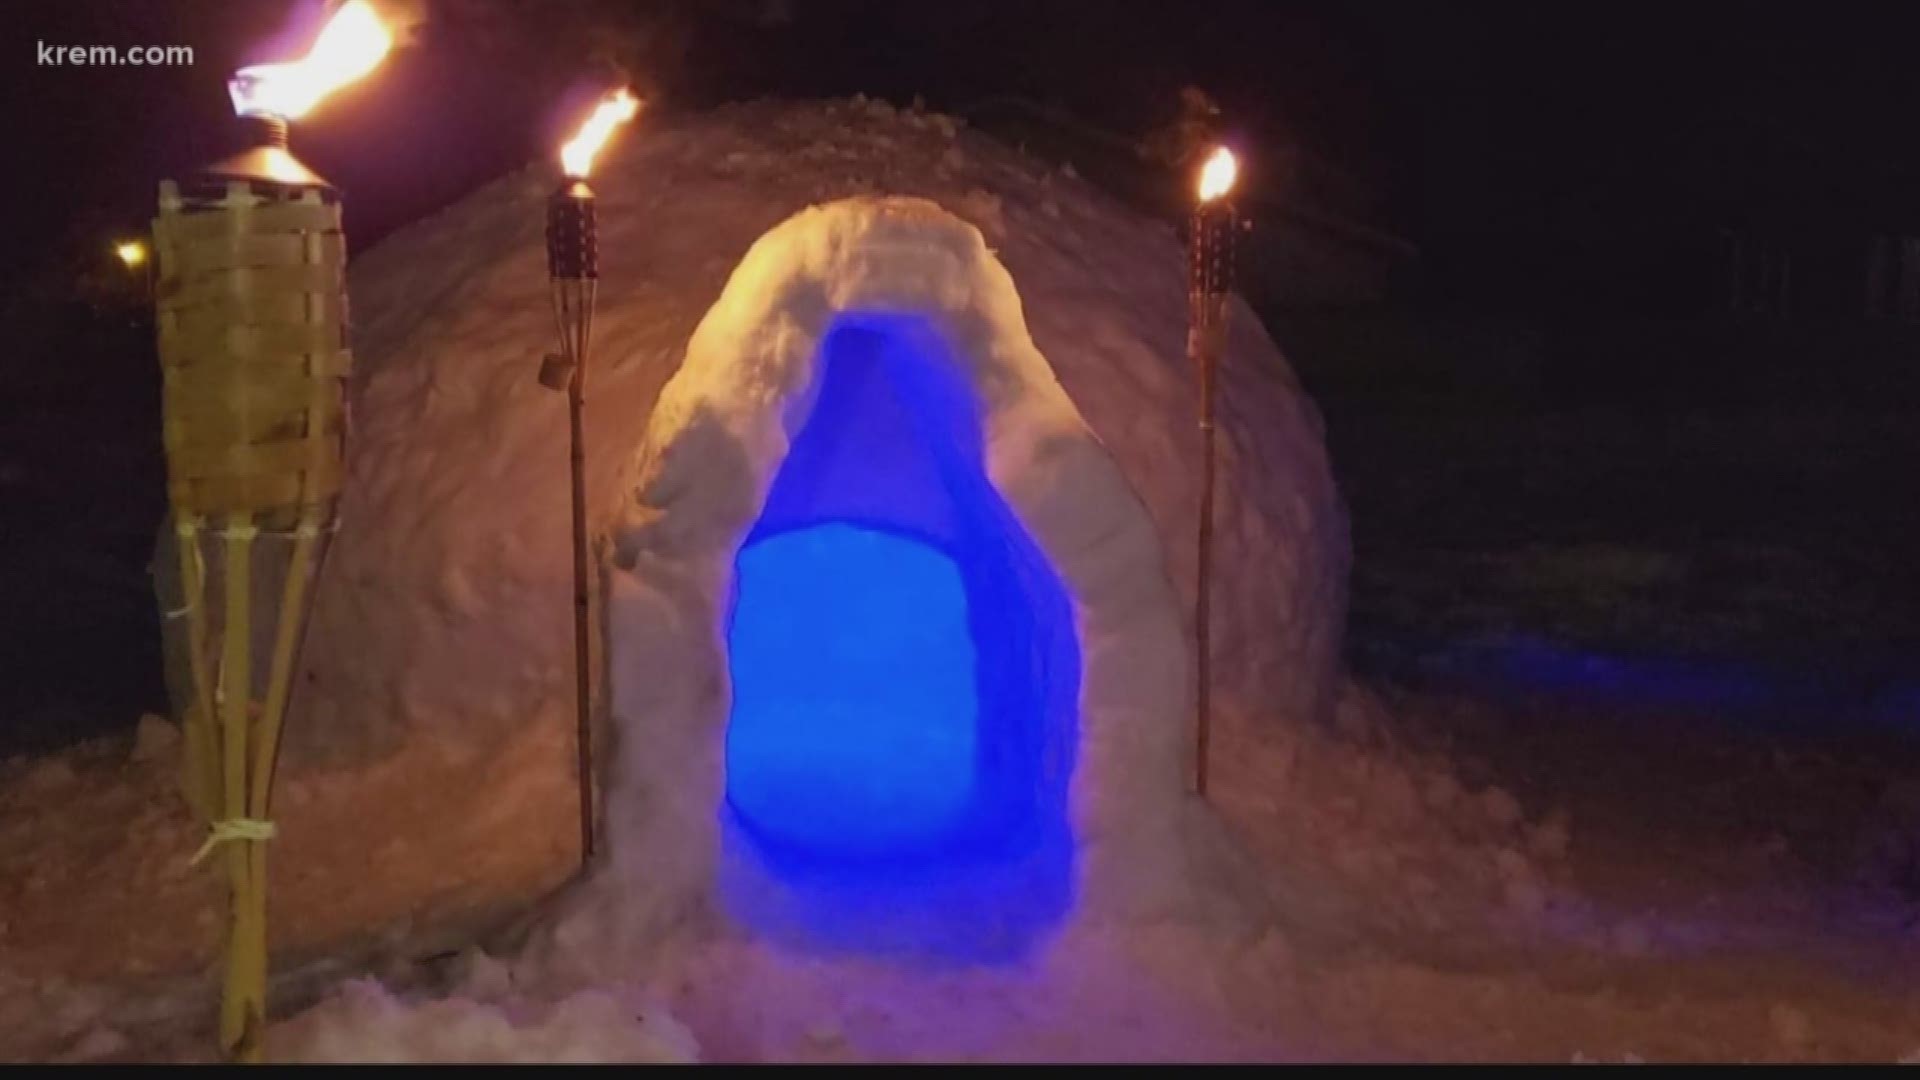 A man in Rathdrum made the most out of the leftover snow by building a life-sized igloo. Neighbors have stopped by to take photos with the structure.